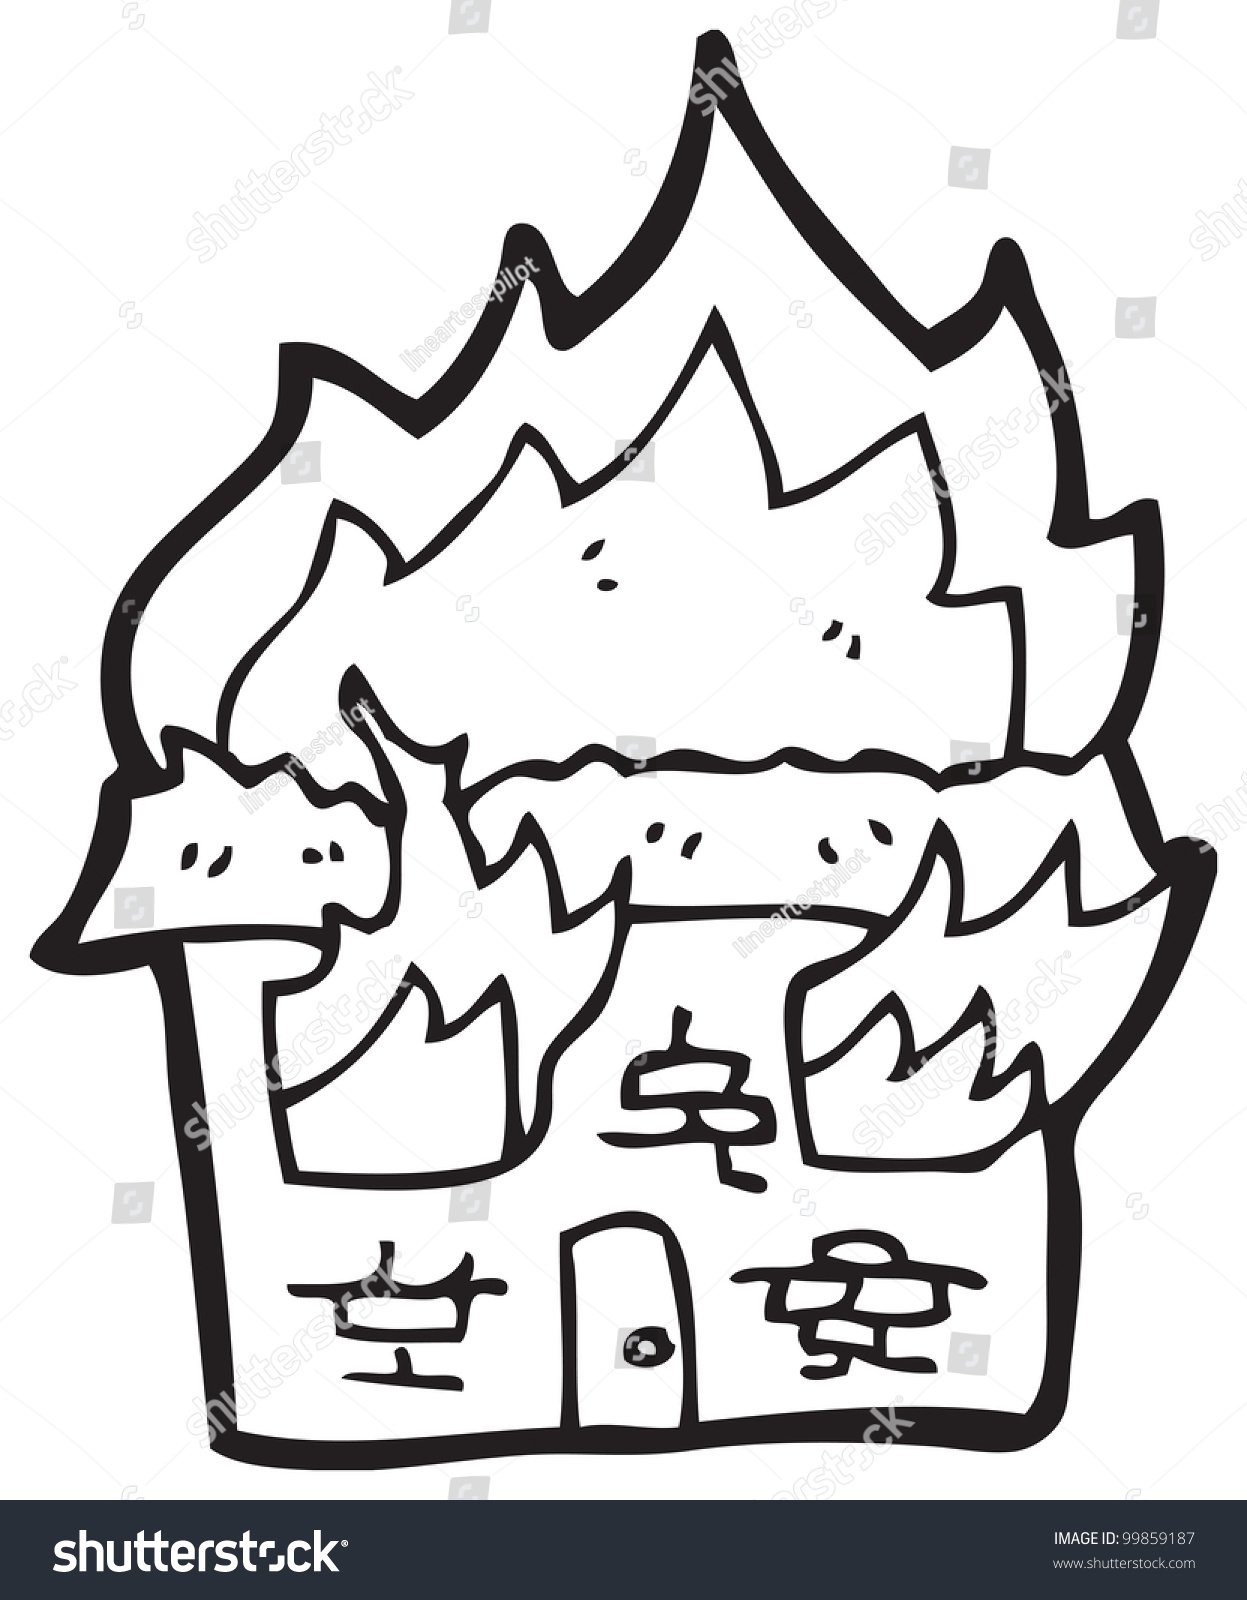 Burning House Clipart Black And White.